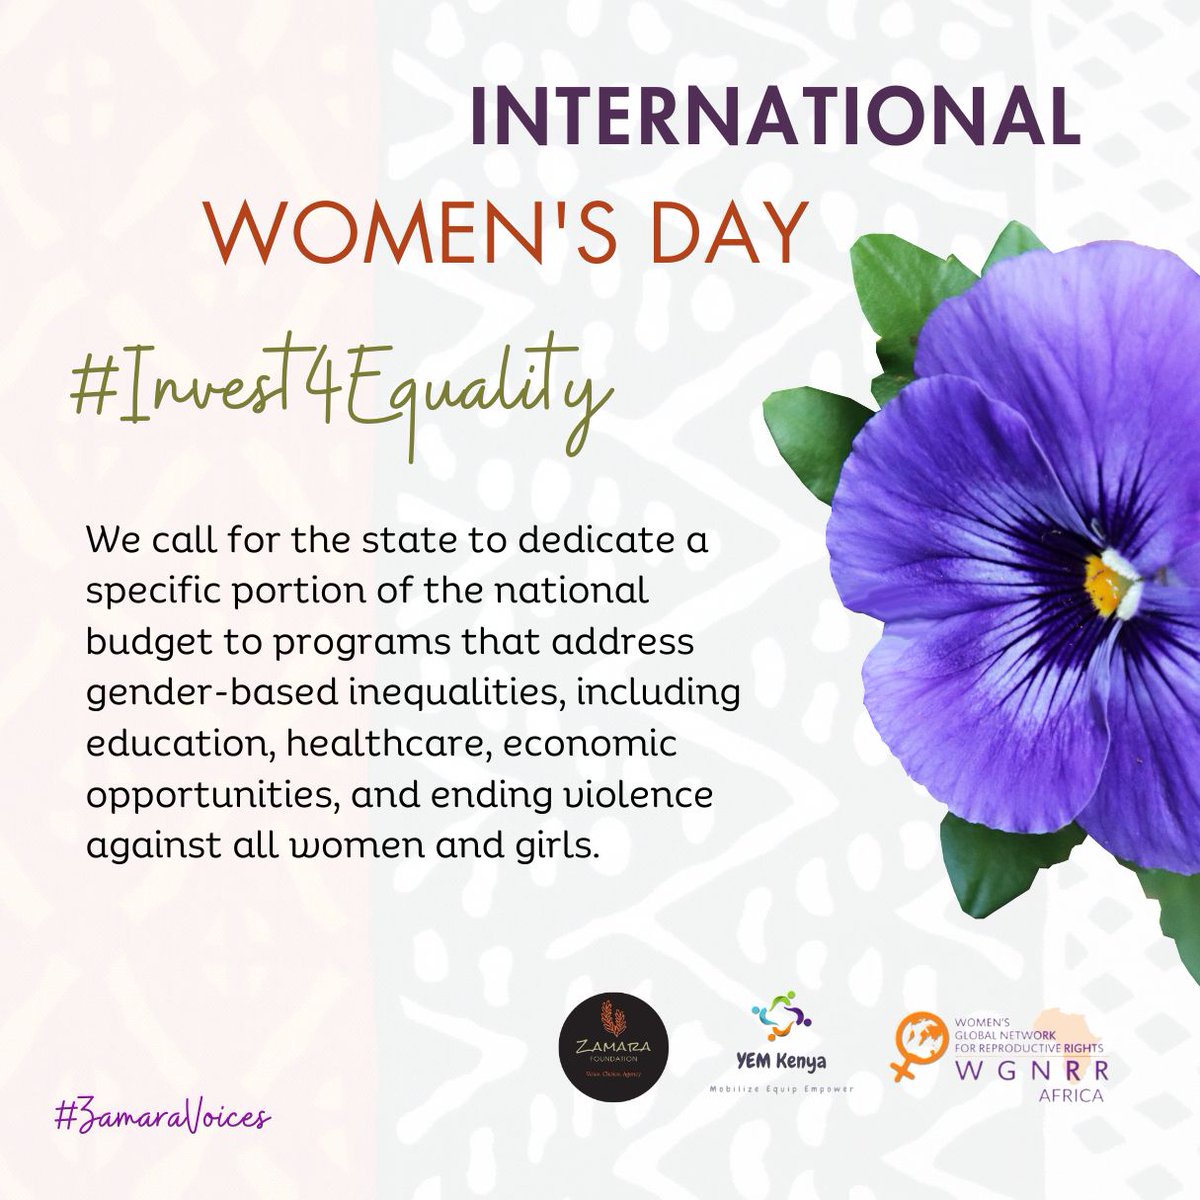 Let's prioritize investments that address the unique needs of girls and women, ensuring they have the tools and resources to thrive
#Invest4Equality 
#ZamaraVoices